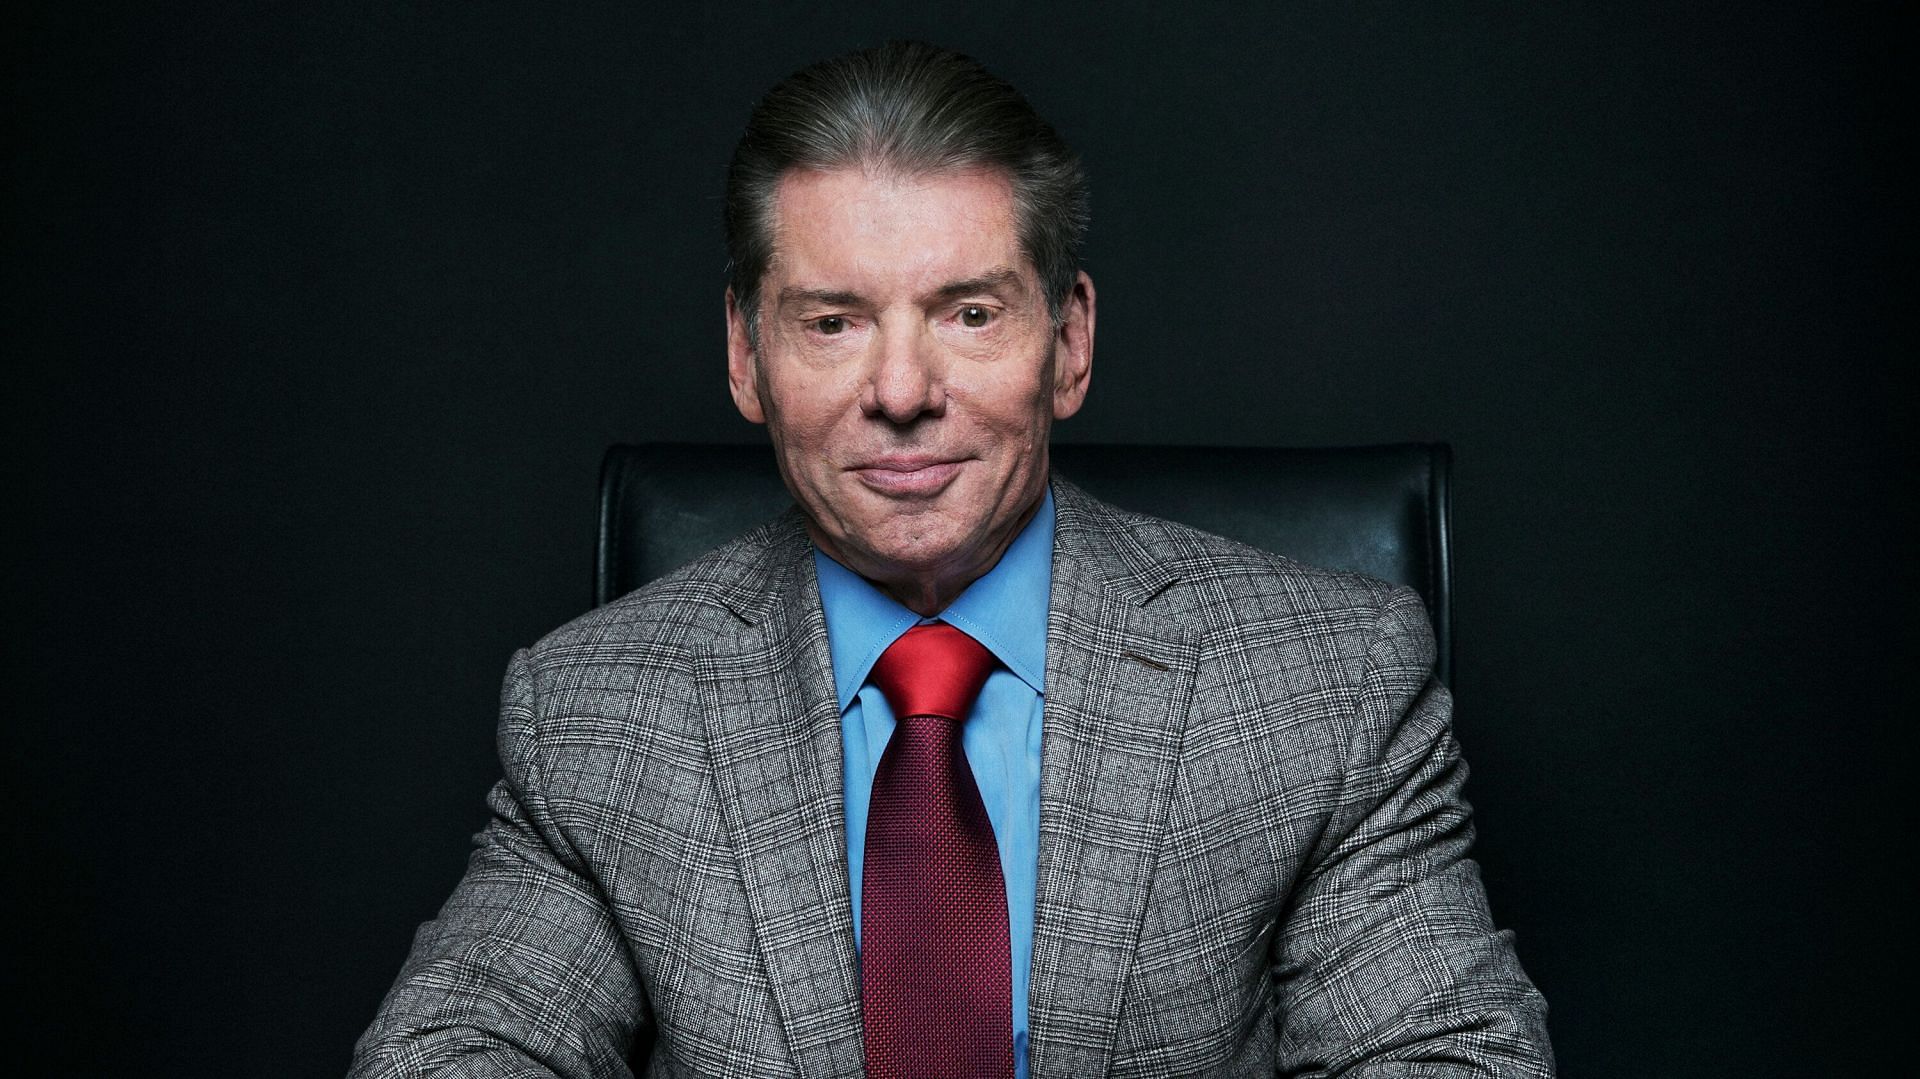 Vince McMahon stepped down as the Chairman of WWE